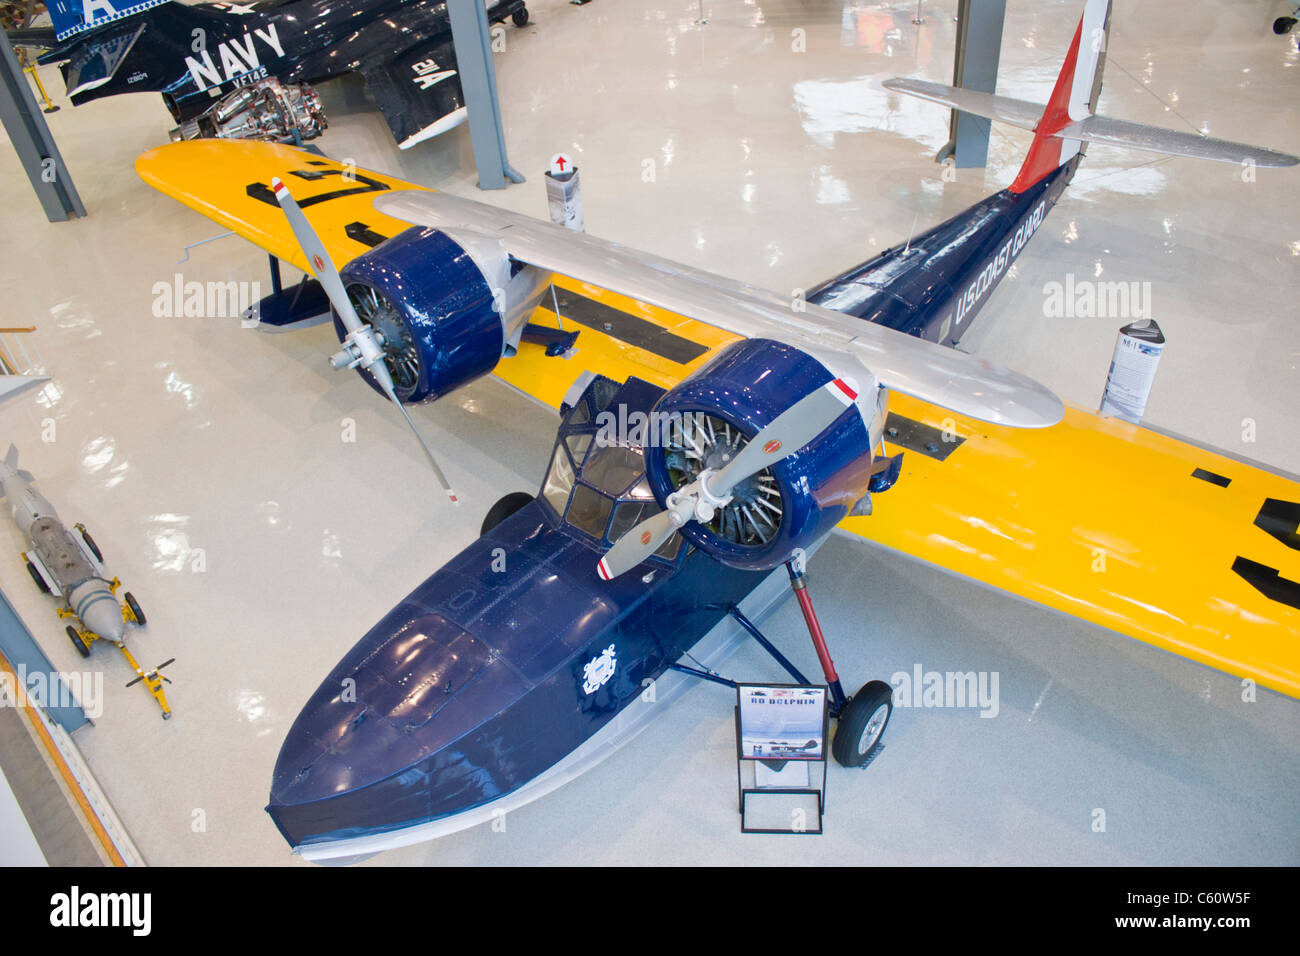 Douglas RD-4 Dolphin Amphibian aircraft at the Naval Air Museum in Pensacola, Florida - home of the Blue Angels. Stock Photo